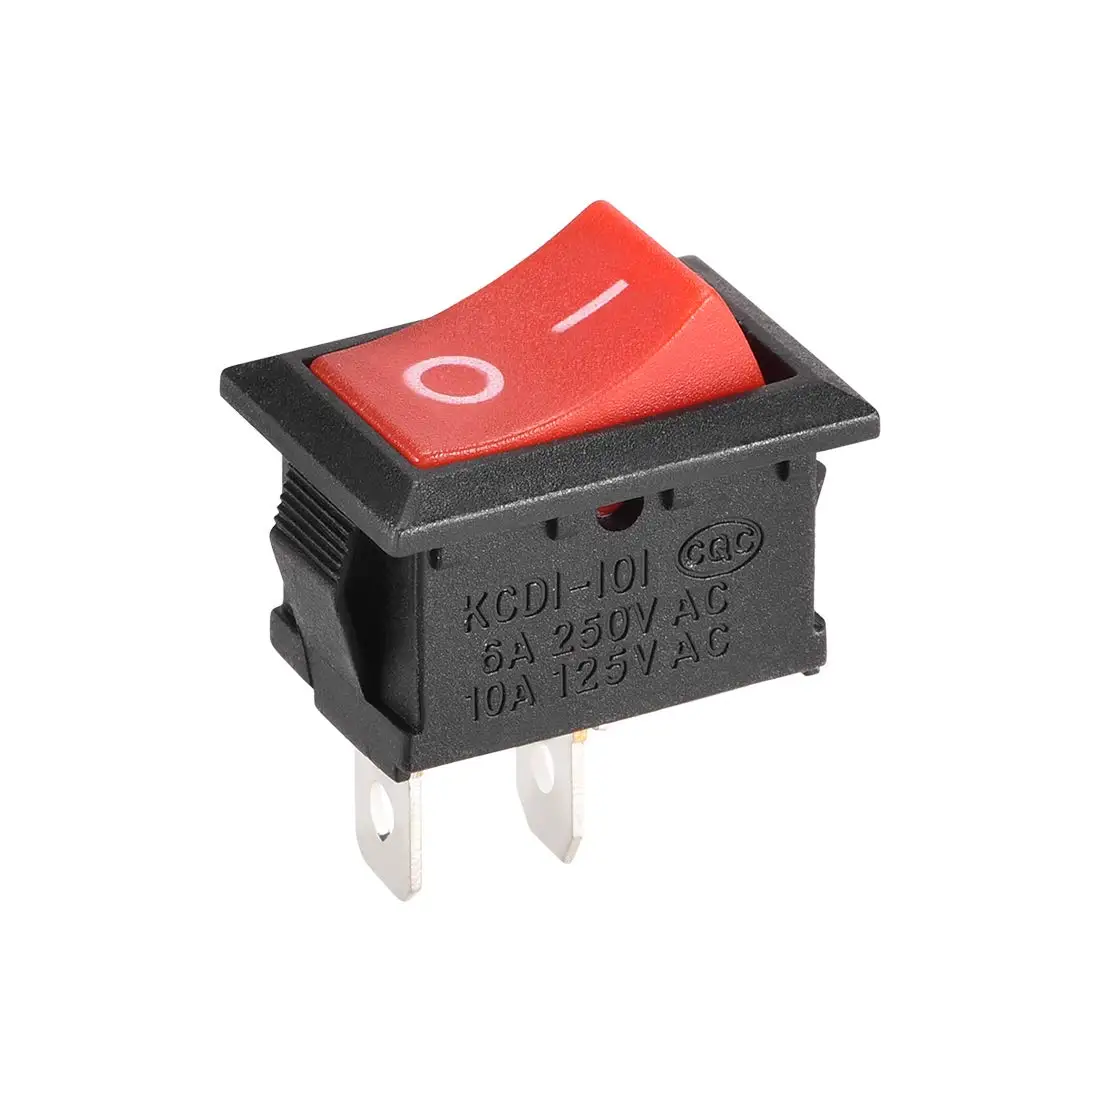 

Keszoox SPST 2 Position On/Off 2Pin Boat Rocker Switch Toggle AC 250V/6A 125V/10A,for Boat,Household Appliances,Red